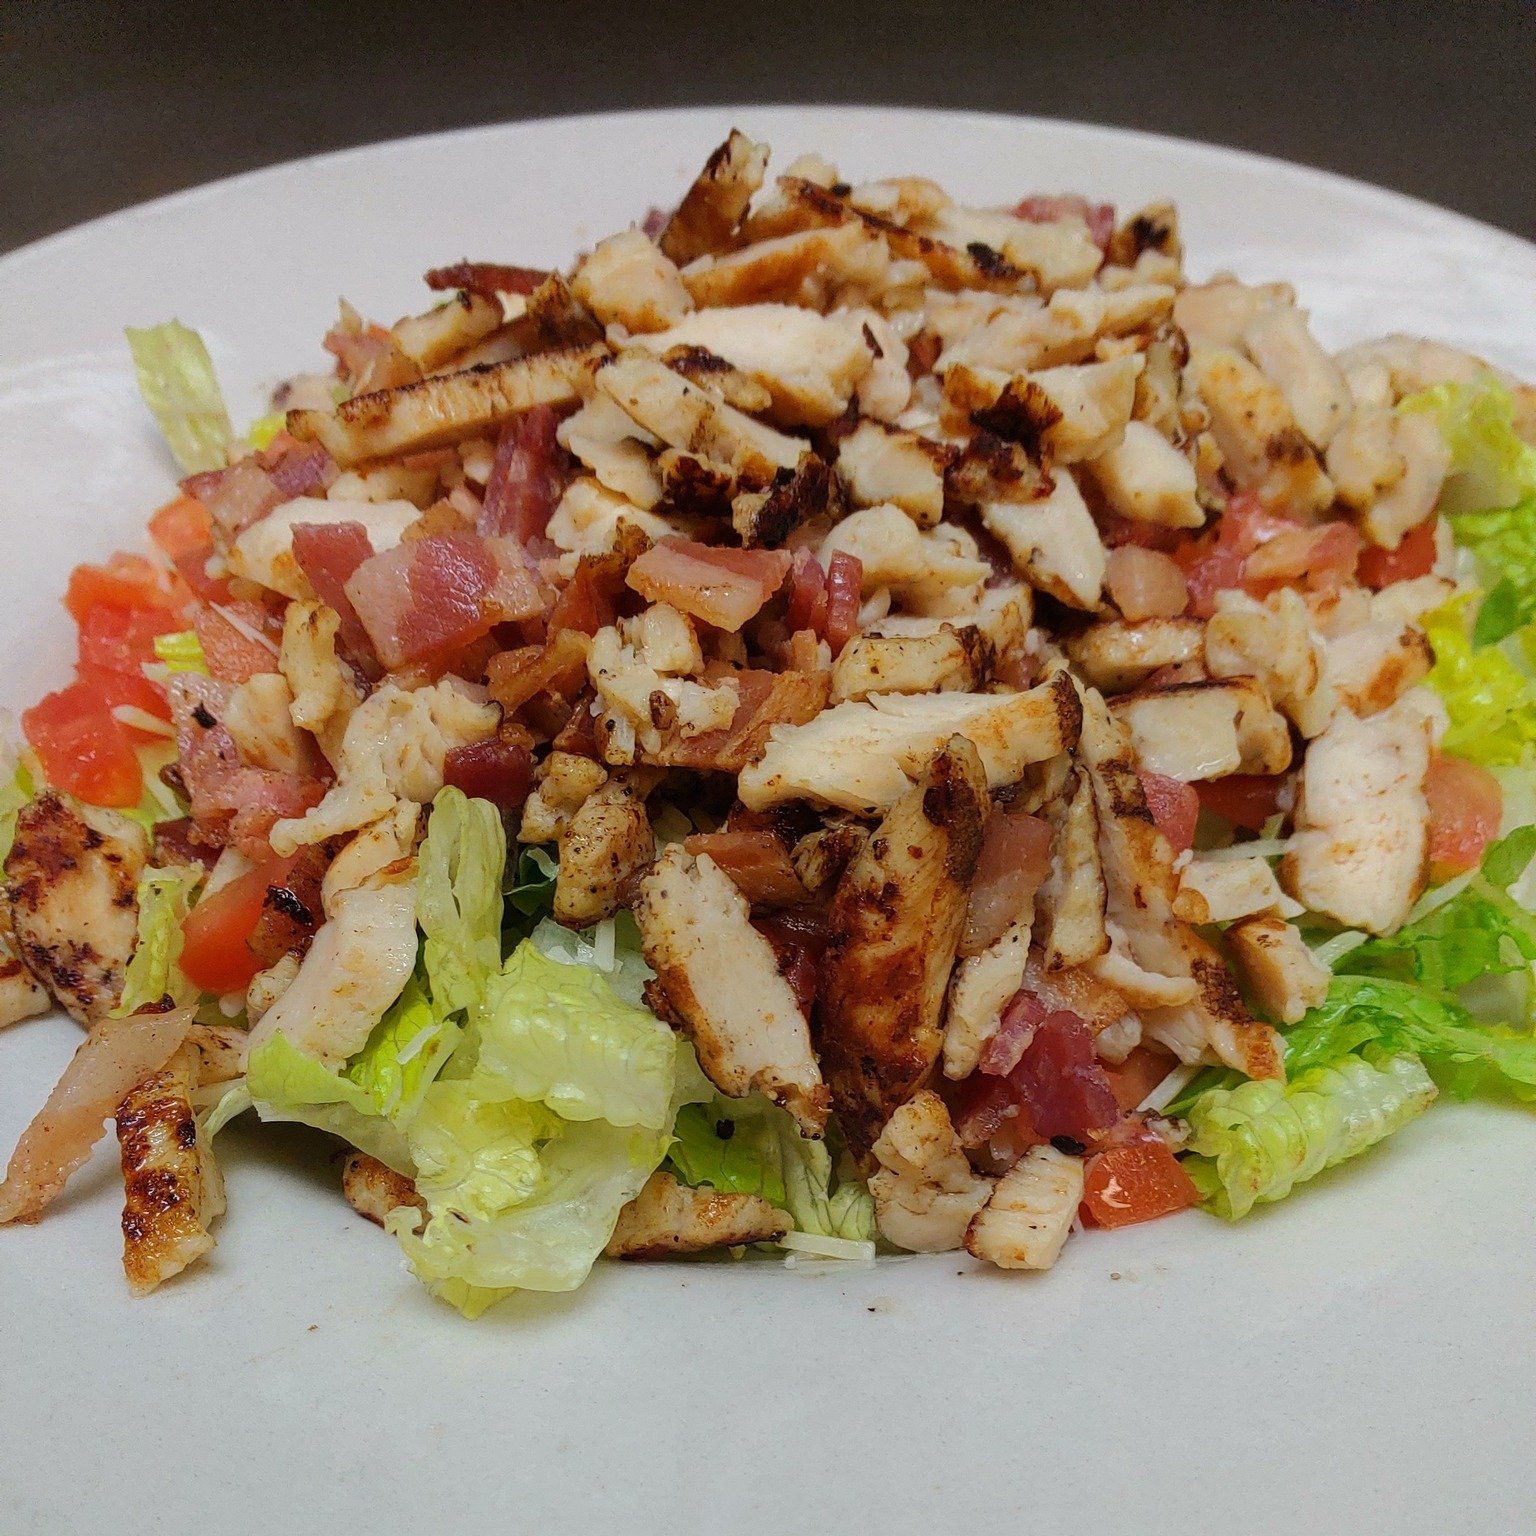 🥗 Crunch into our BLT Chicken Caesar Salad! Fresh greens, crispy bacon bits, parmesan, croutons, tomatoes, and grilled chicken, all with Caesar dressing on the side. It's a fresh take on a classic favorite.

#dreezrestaurant #homemeansnevada #lunchb